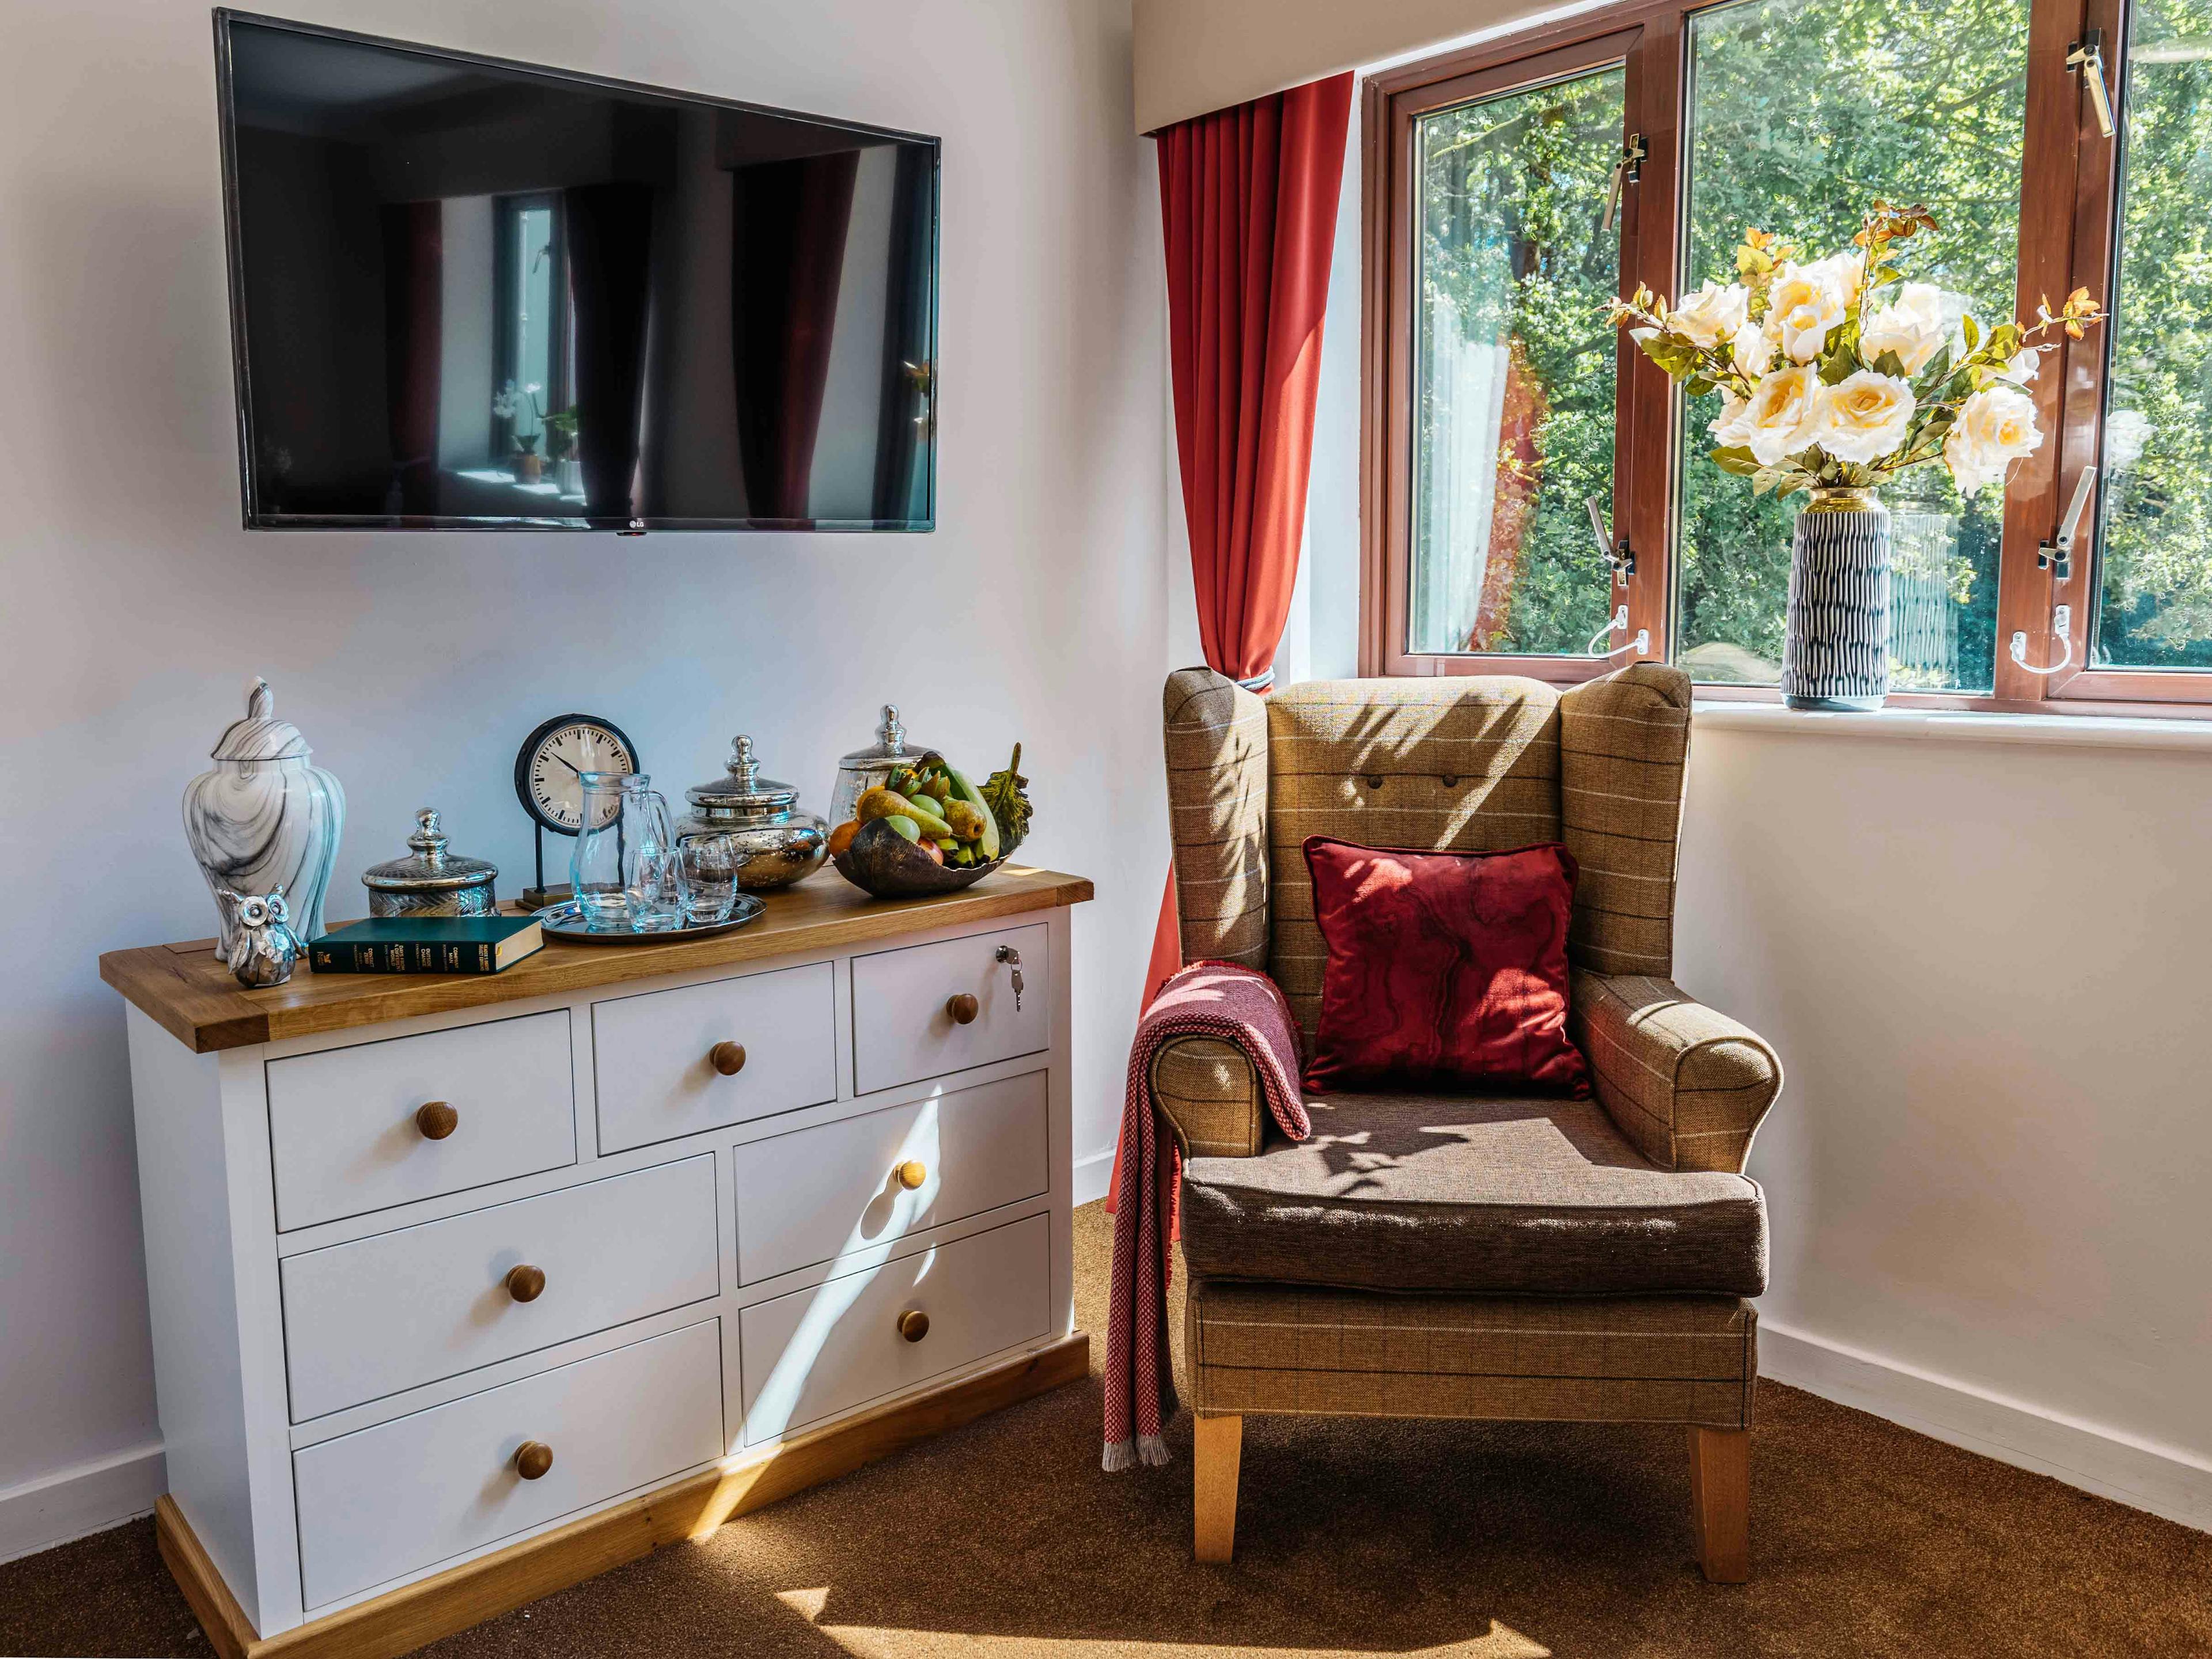 Bedroom at Lawton Manor Care Home in Kidsgrove, Newcastle-under-Lyme